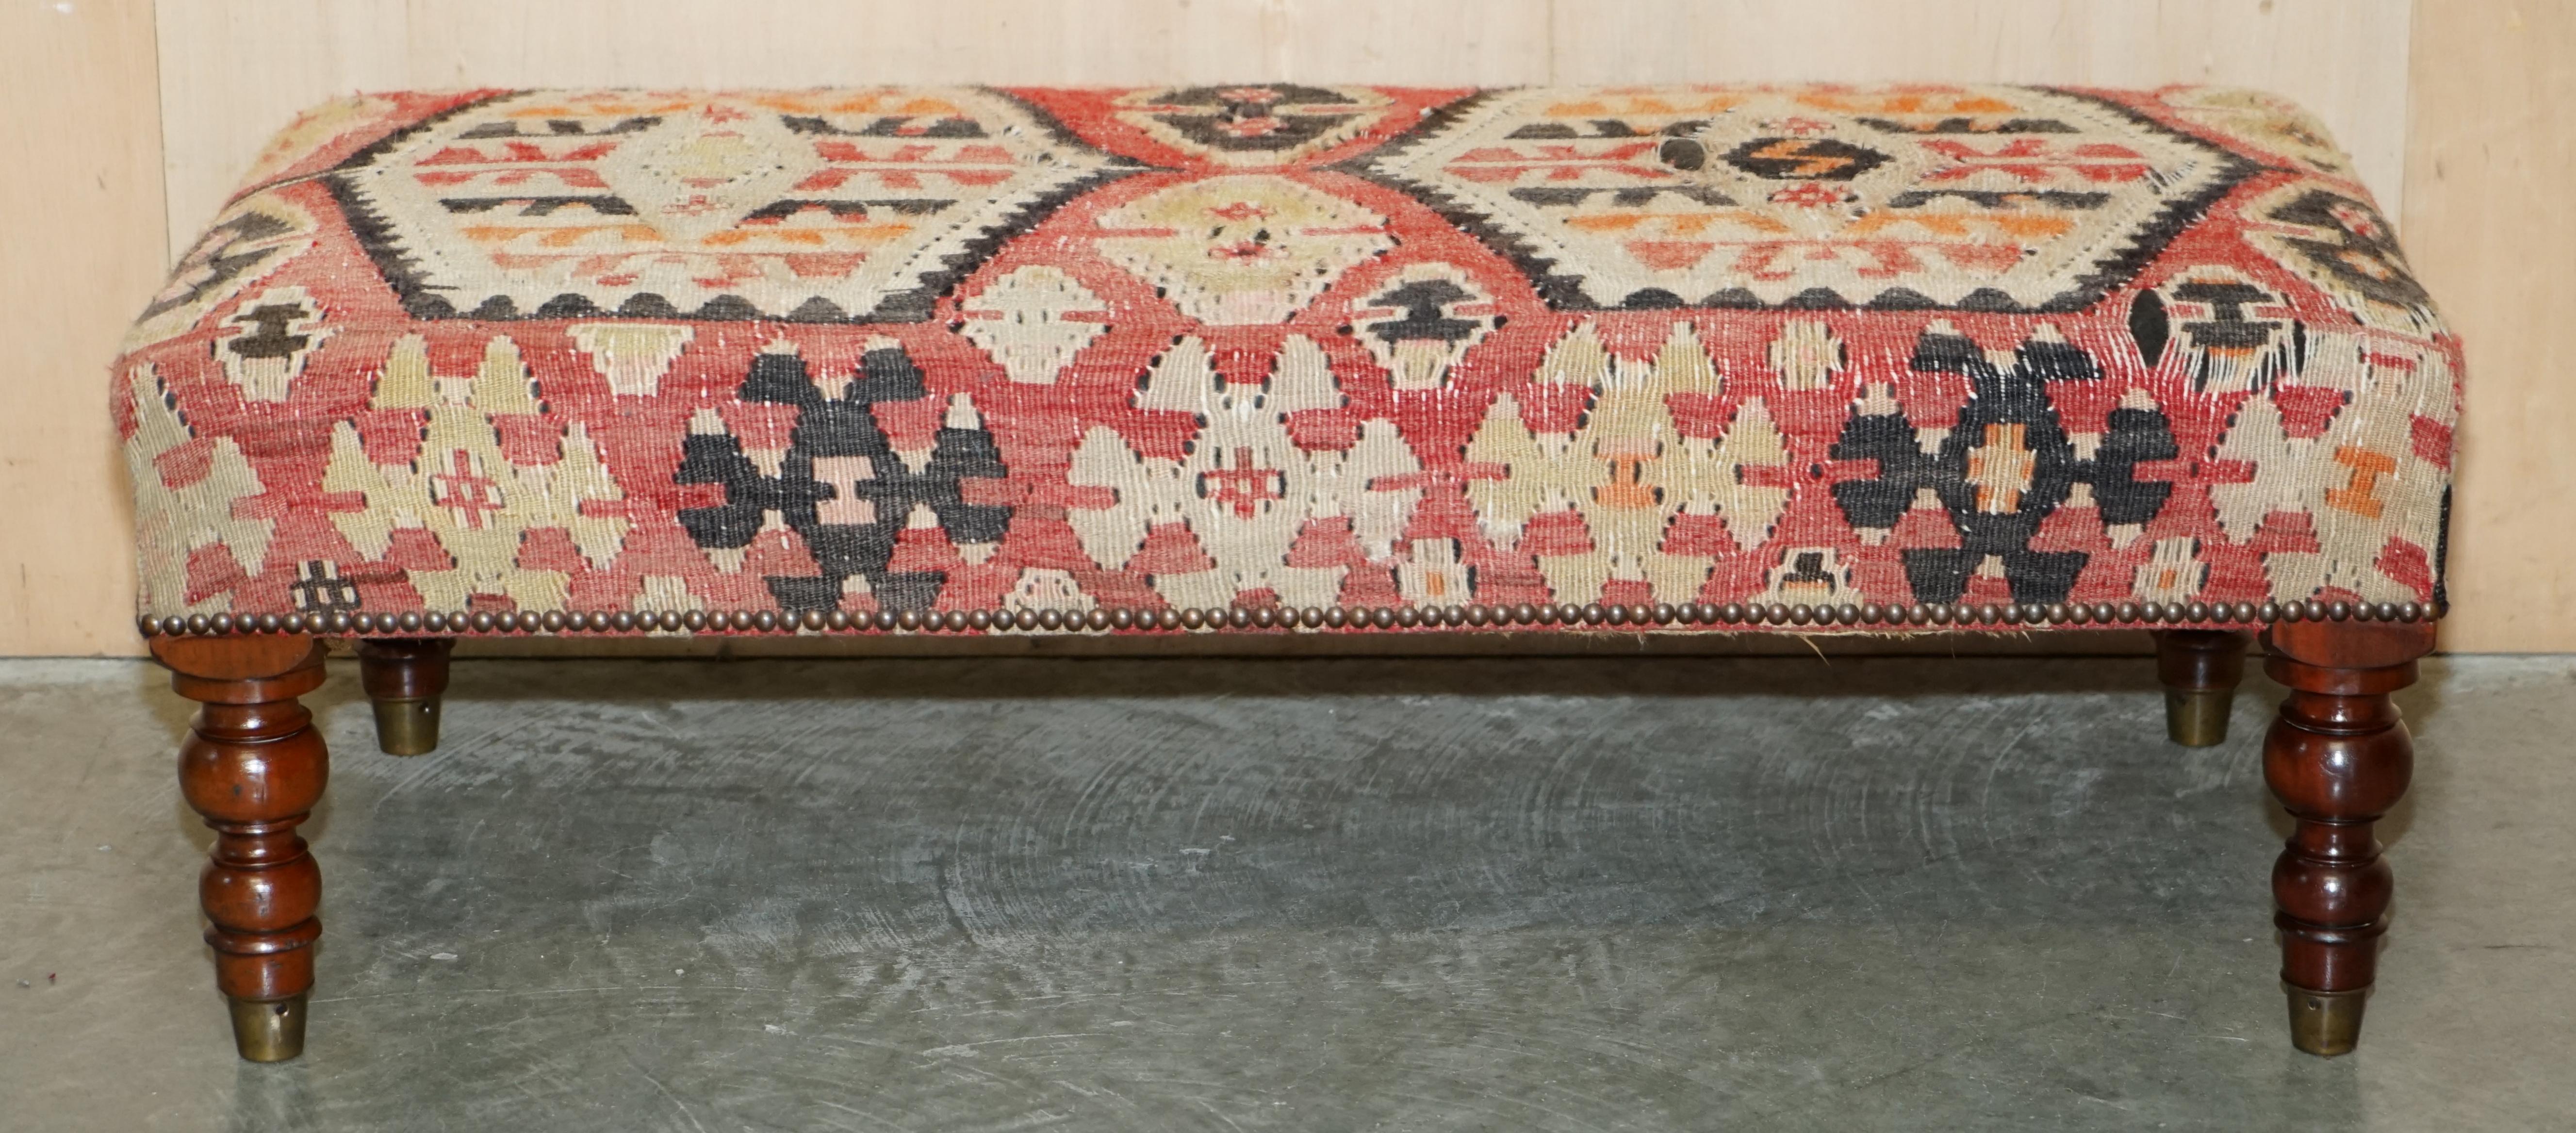 STUNNING AND COLLECTABLE ViNTAGE GEORGE SMITH CHELSEA KILIM FOOTSTOOL OTTOMAN 10